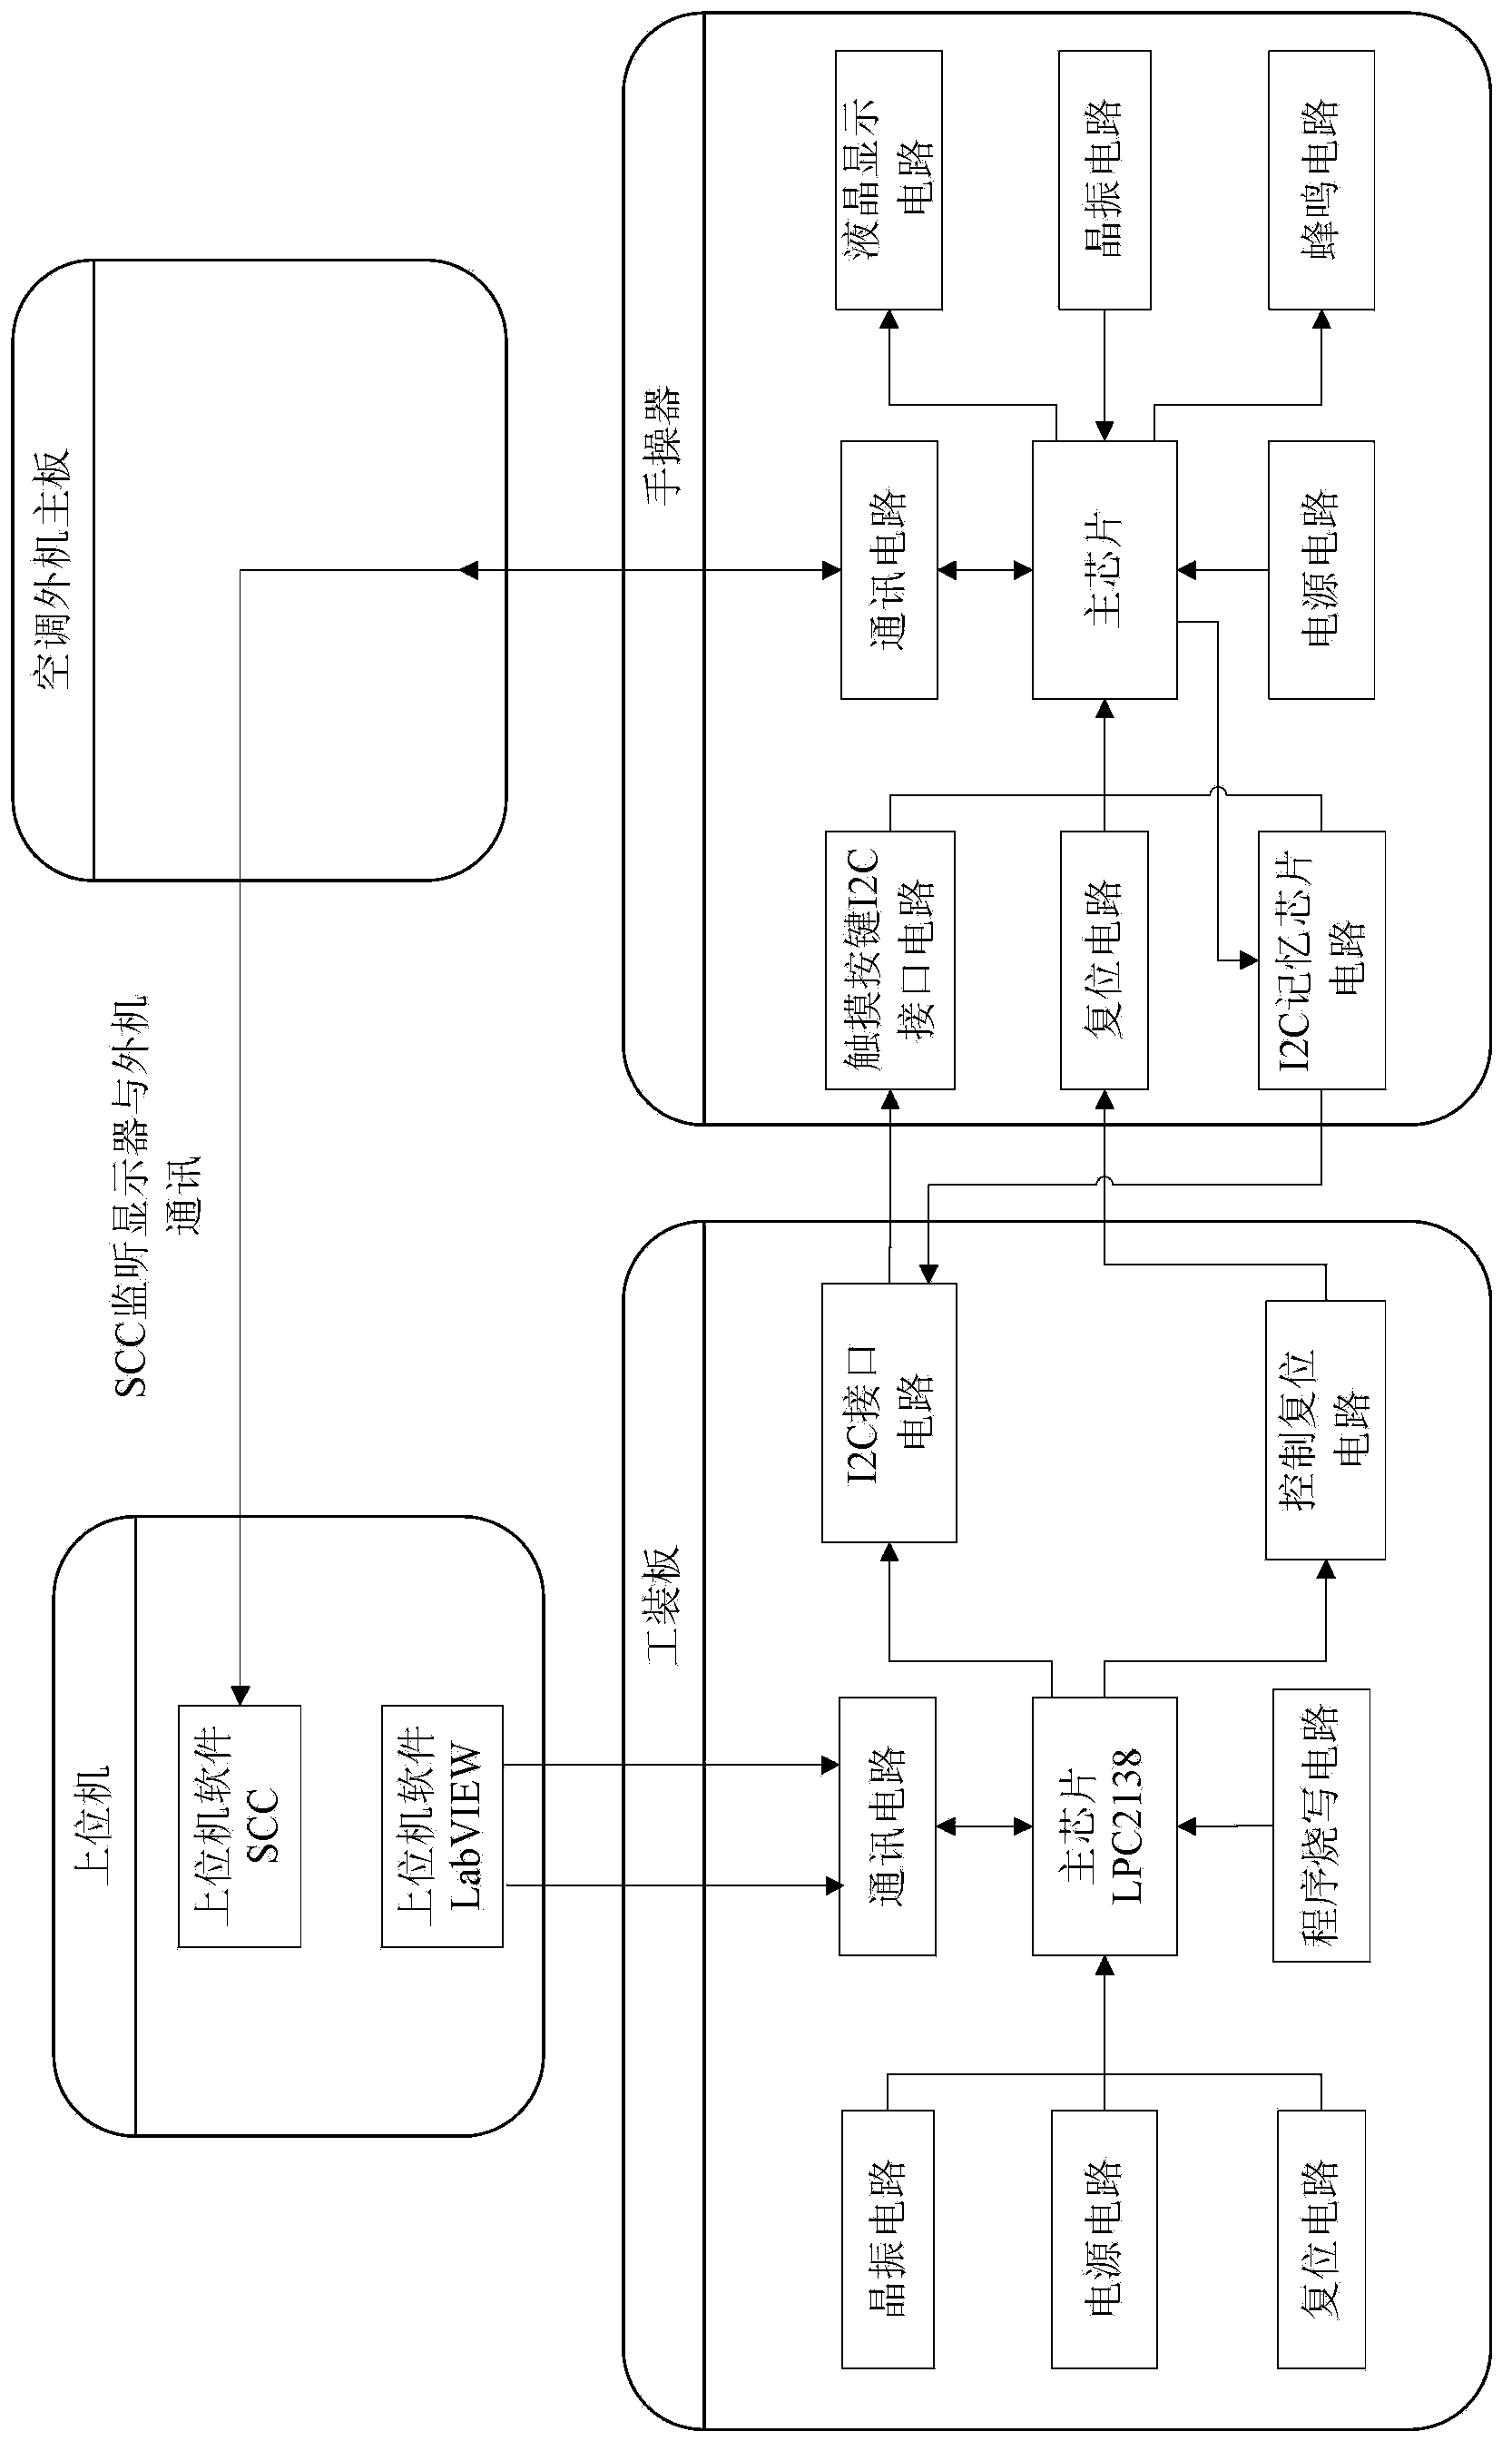 Testing tool, system and method of electrical equipment